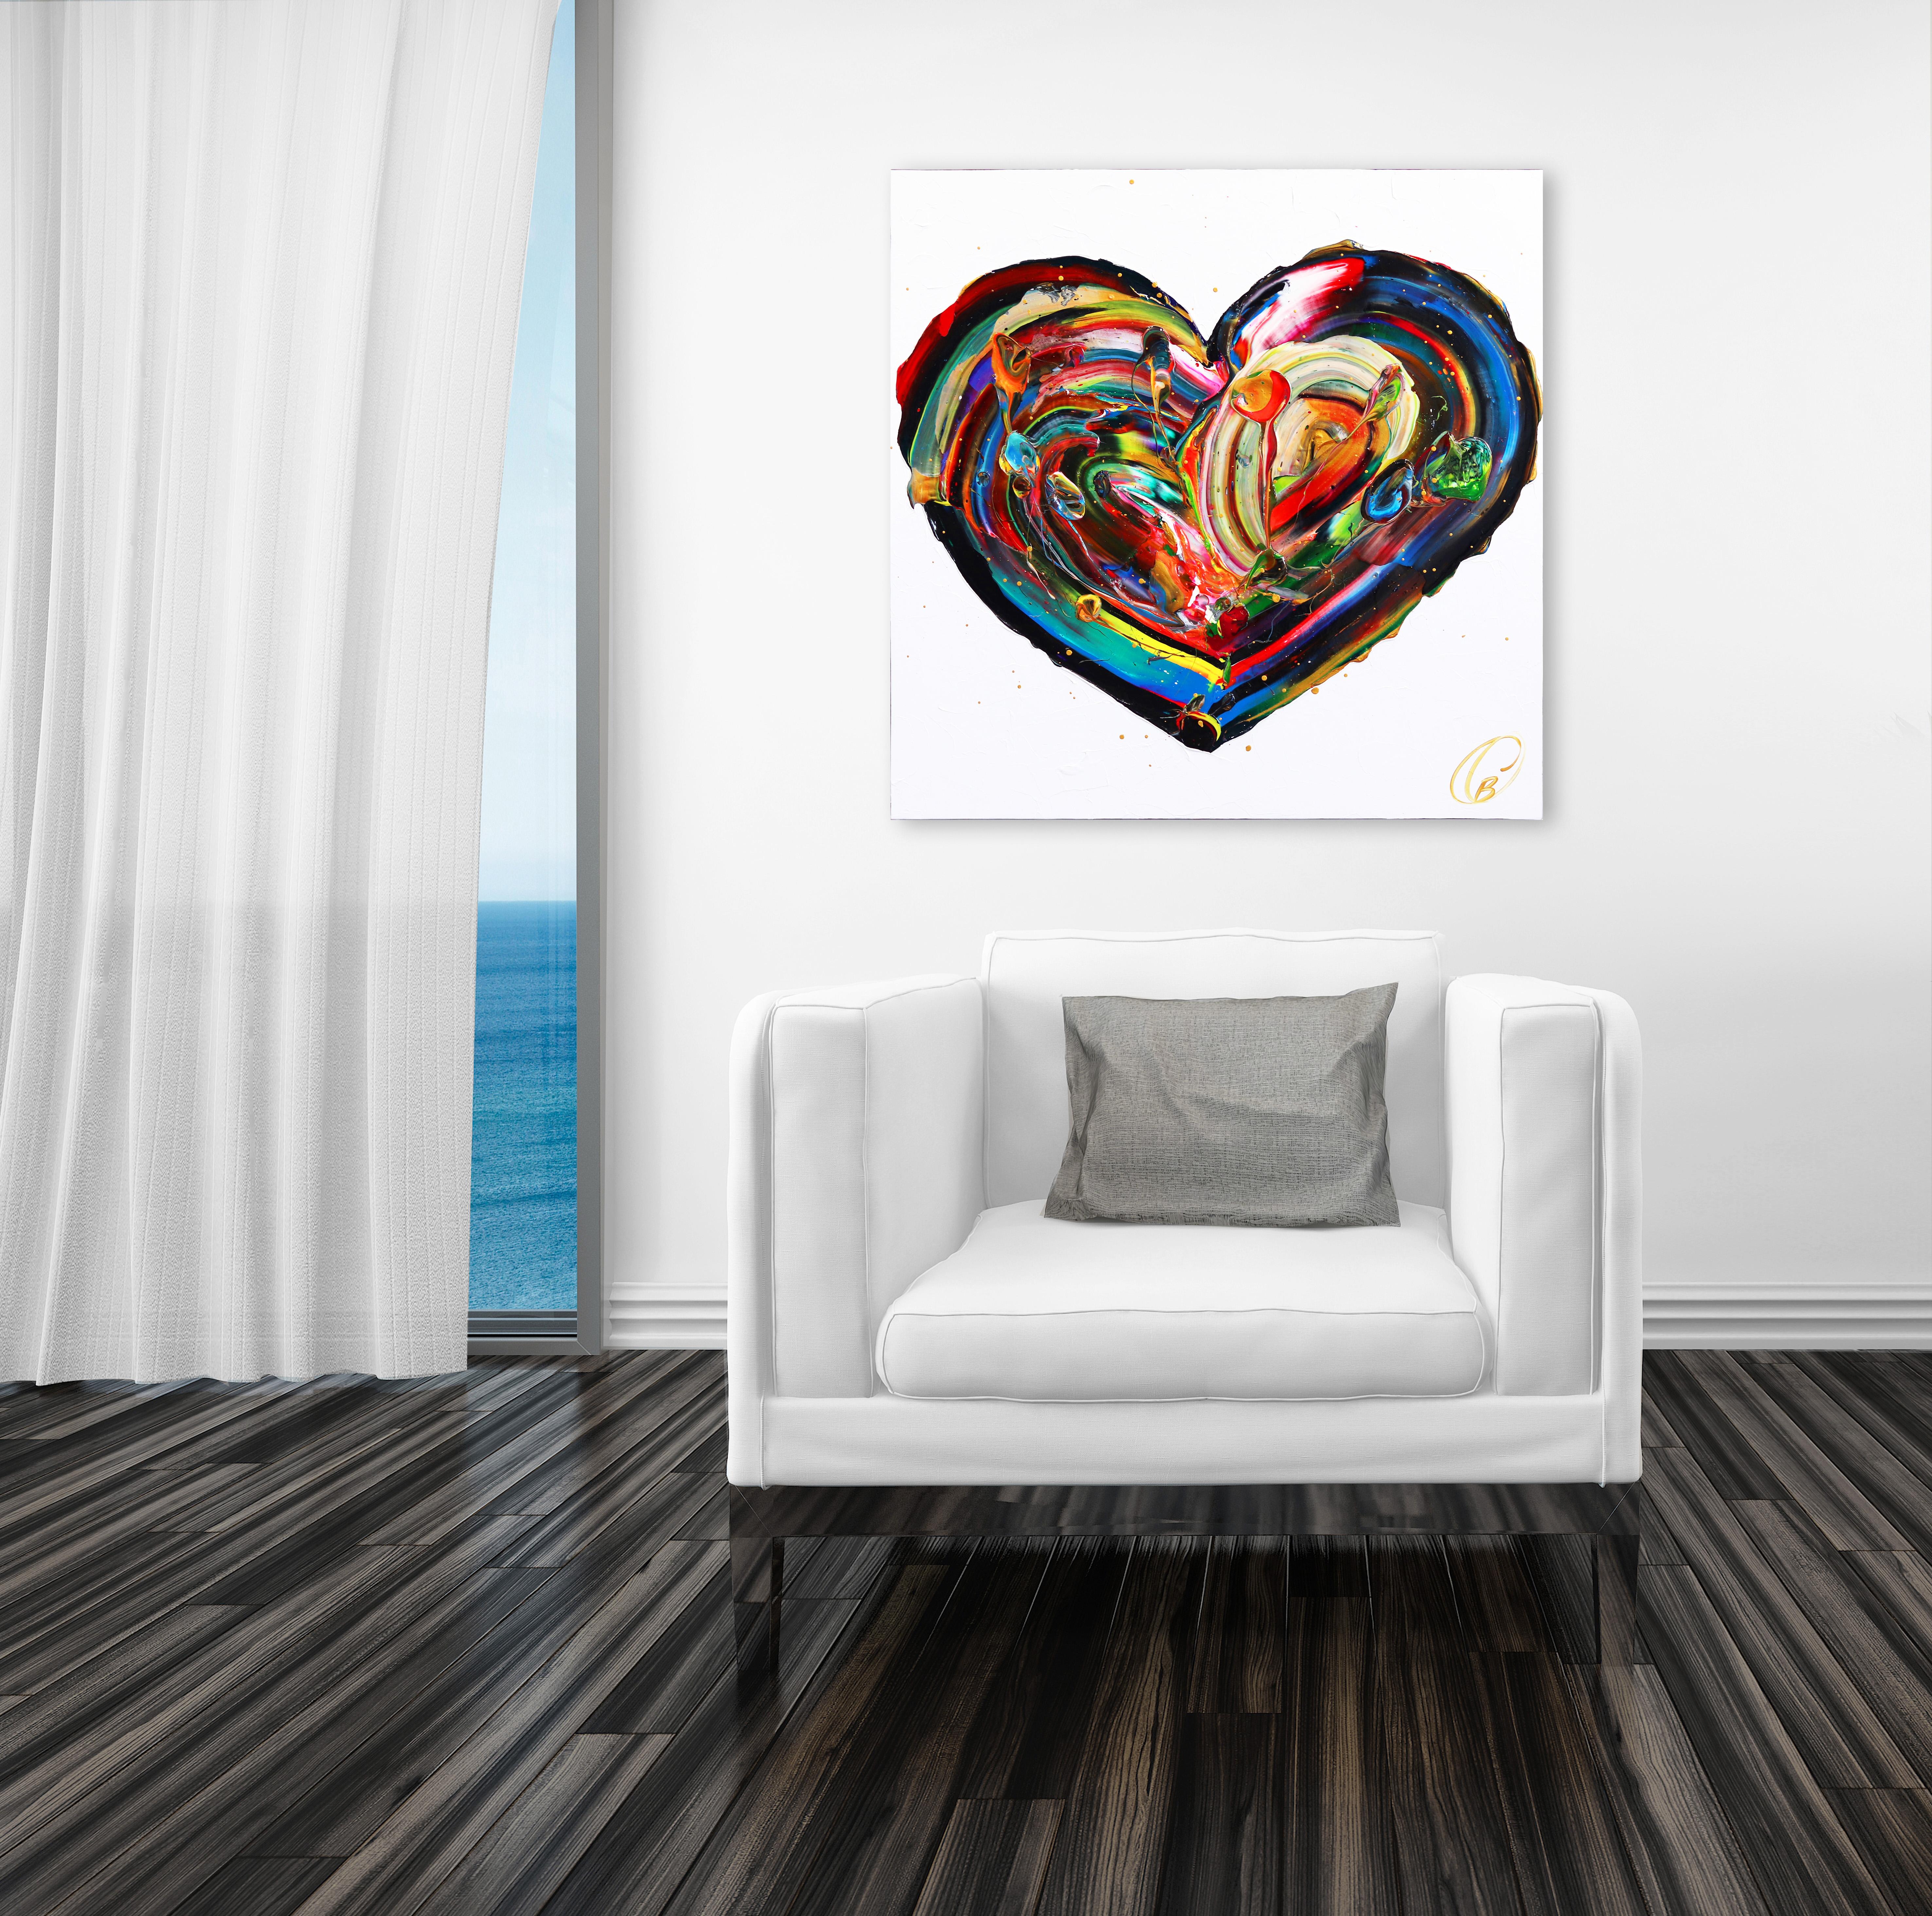 Love Wins - Impasto Thick Paint Original Colorful Heart Artwork - Painting by Cynthia Coulombe Bégin